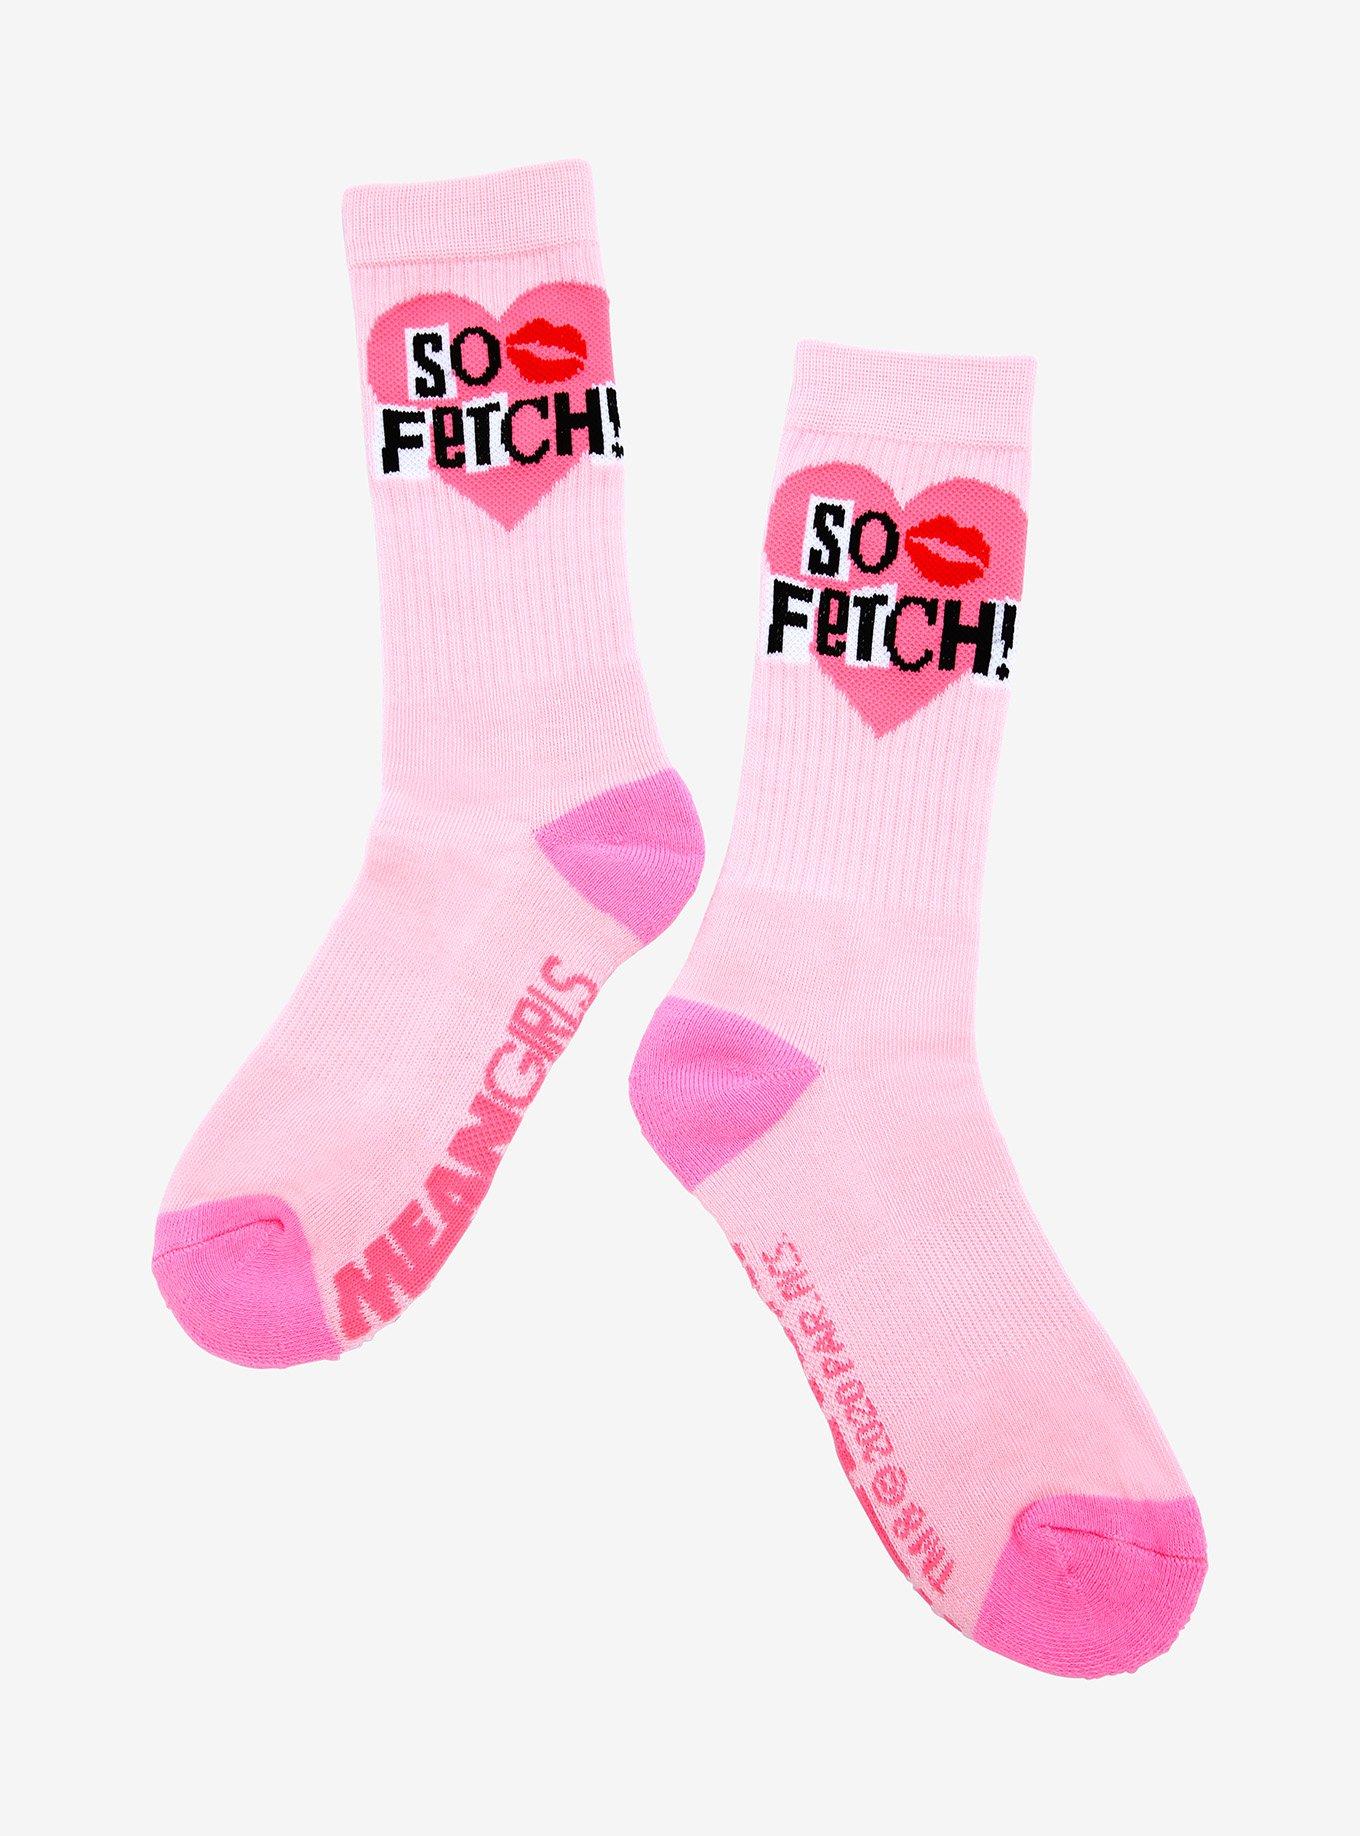 New MEAN GIRLS Ladies 5 Pair No Show Socks I'M ON AN ALL CARB DIET, SO  FETCH